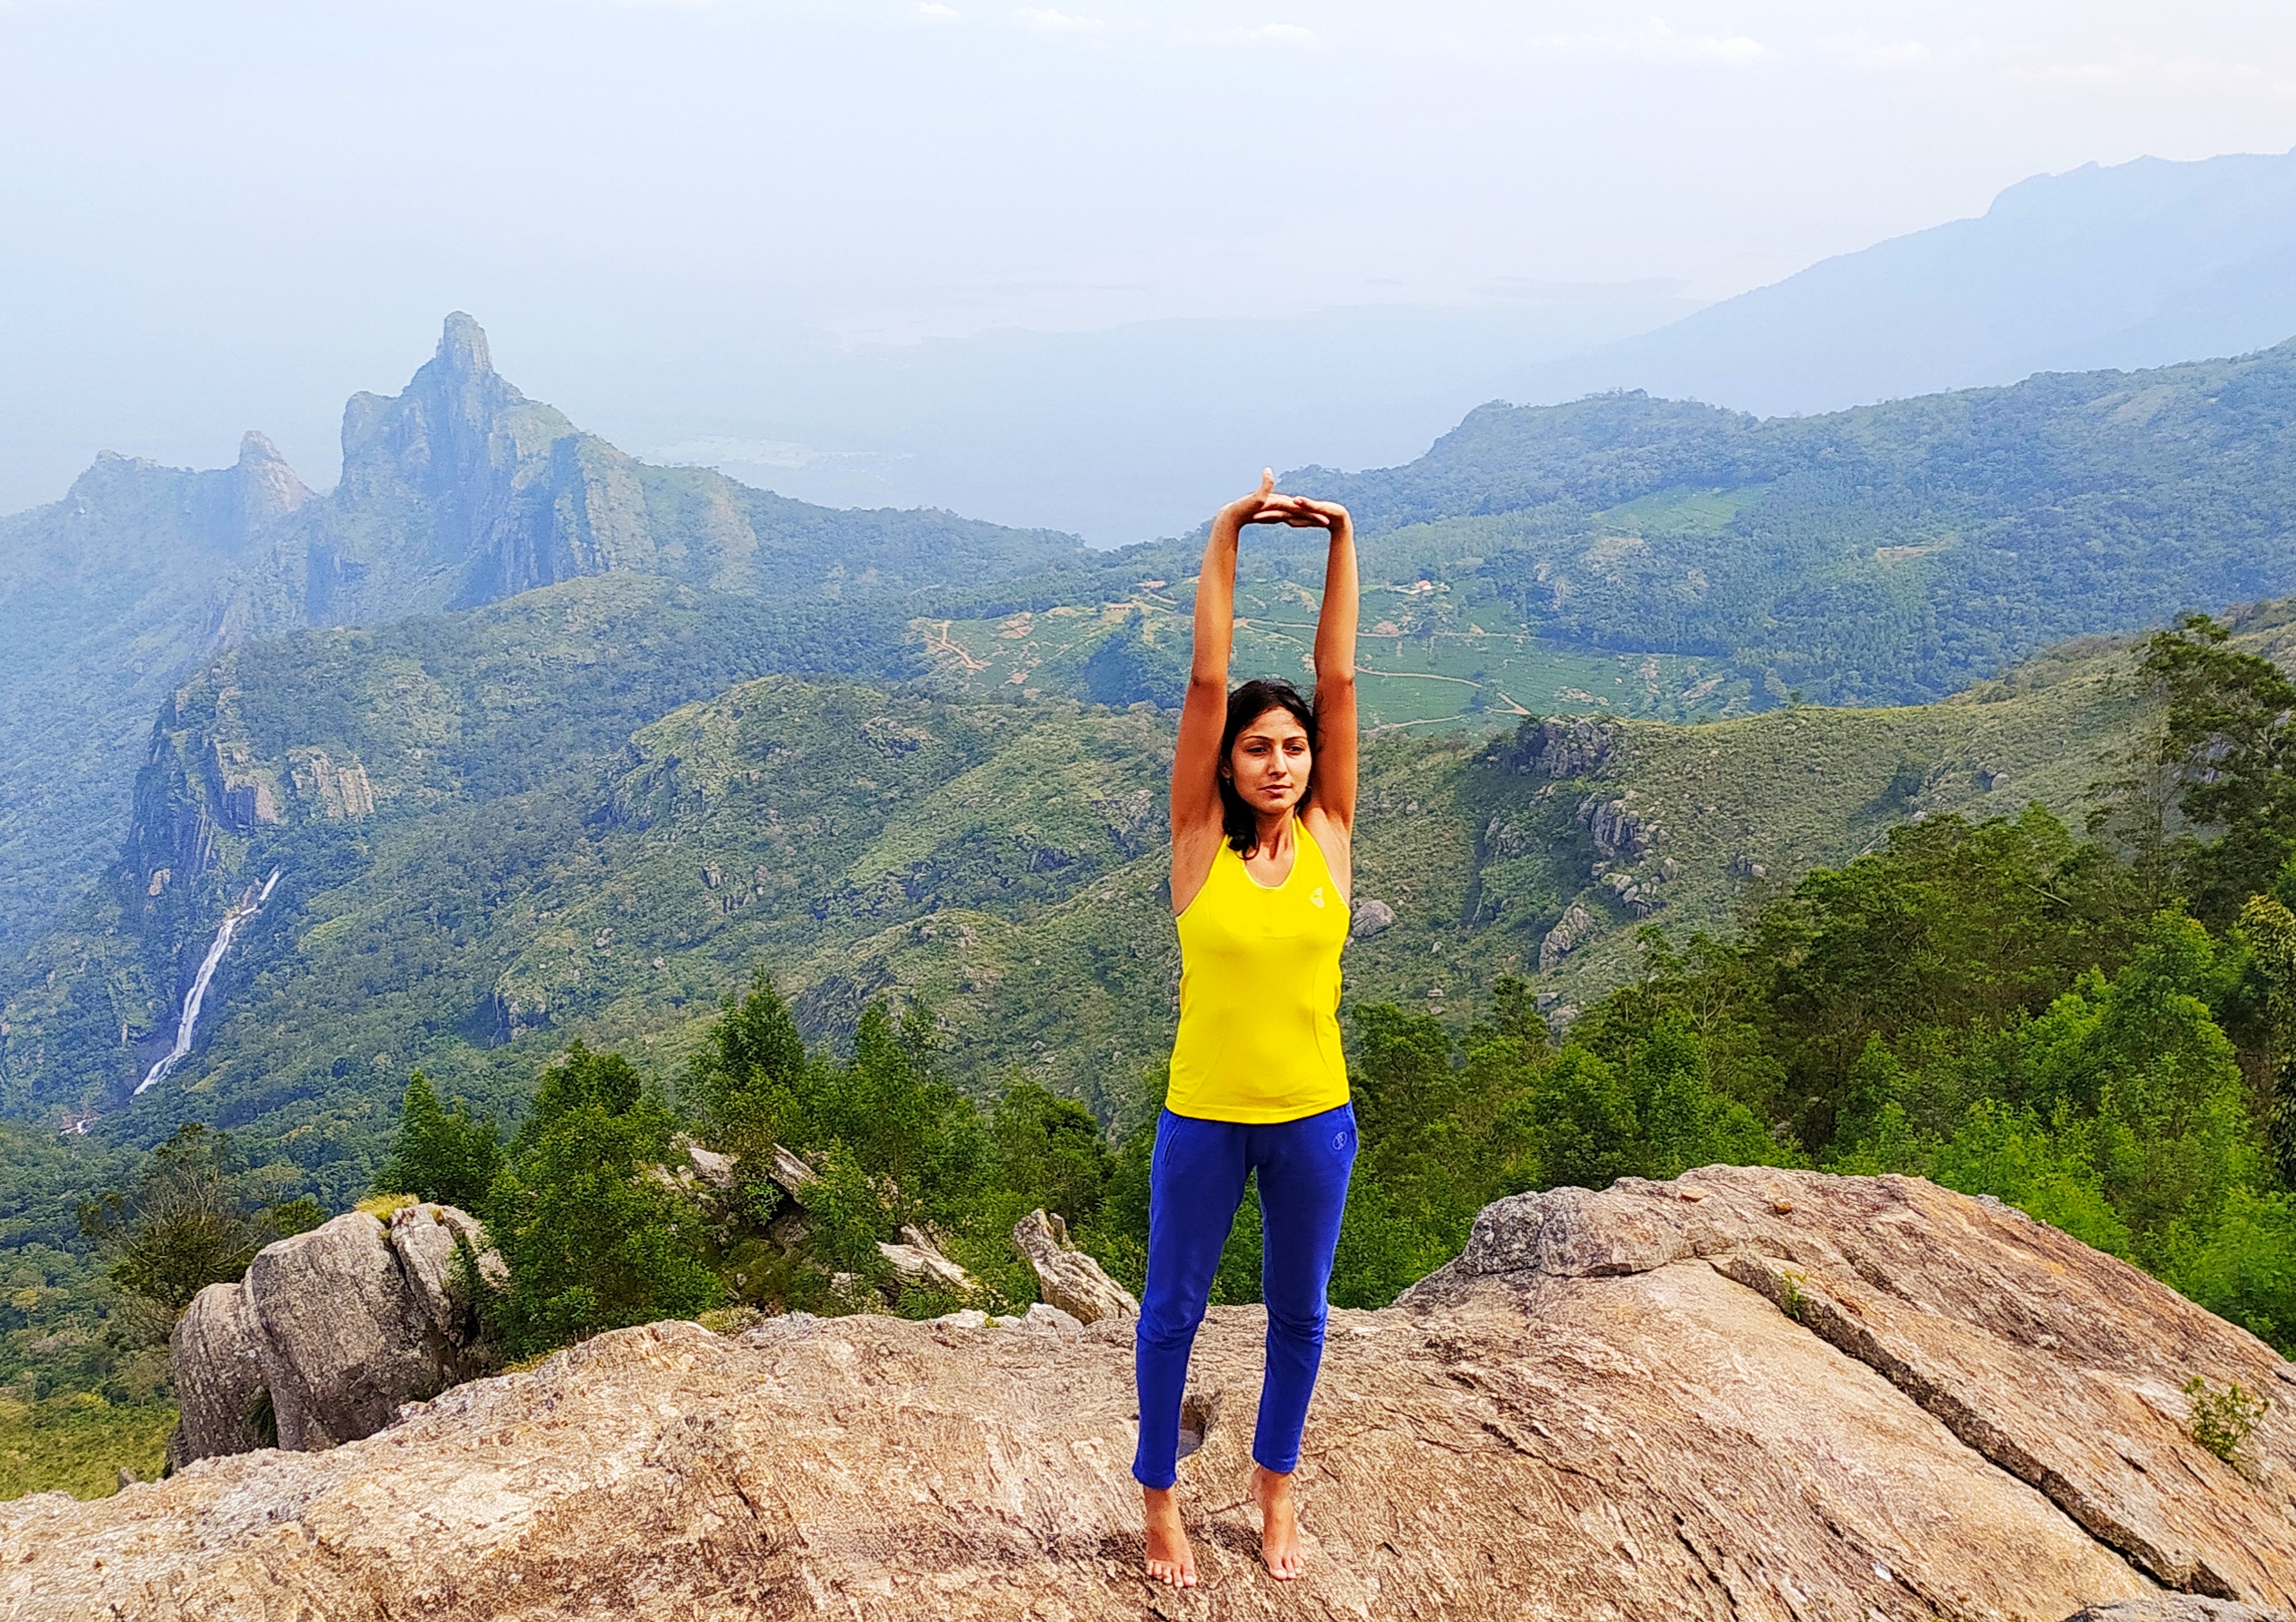 Is it possible to Strengthens the shoulders, back muscles and calves naturally? Yes. Use Tadasana to Strengthen the shoulders, back muscles and calves.